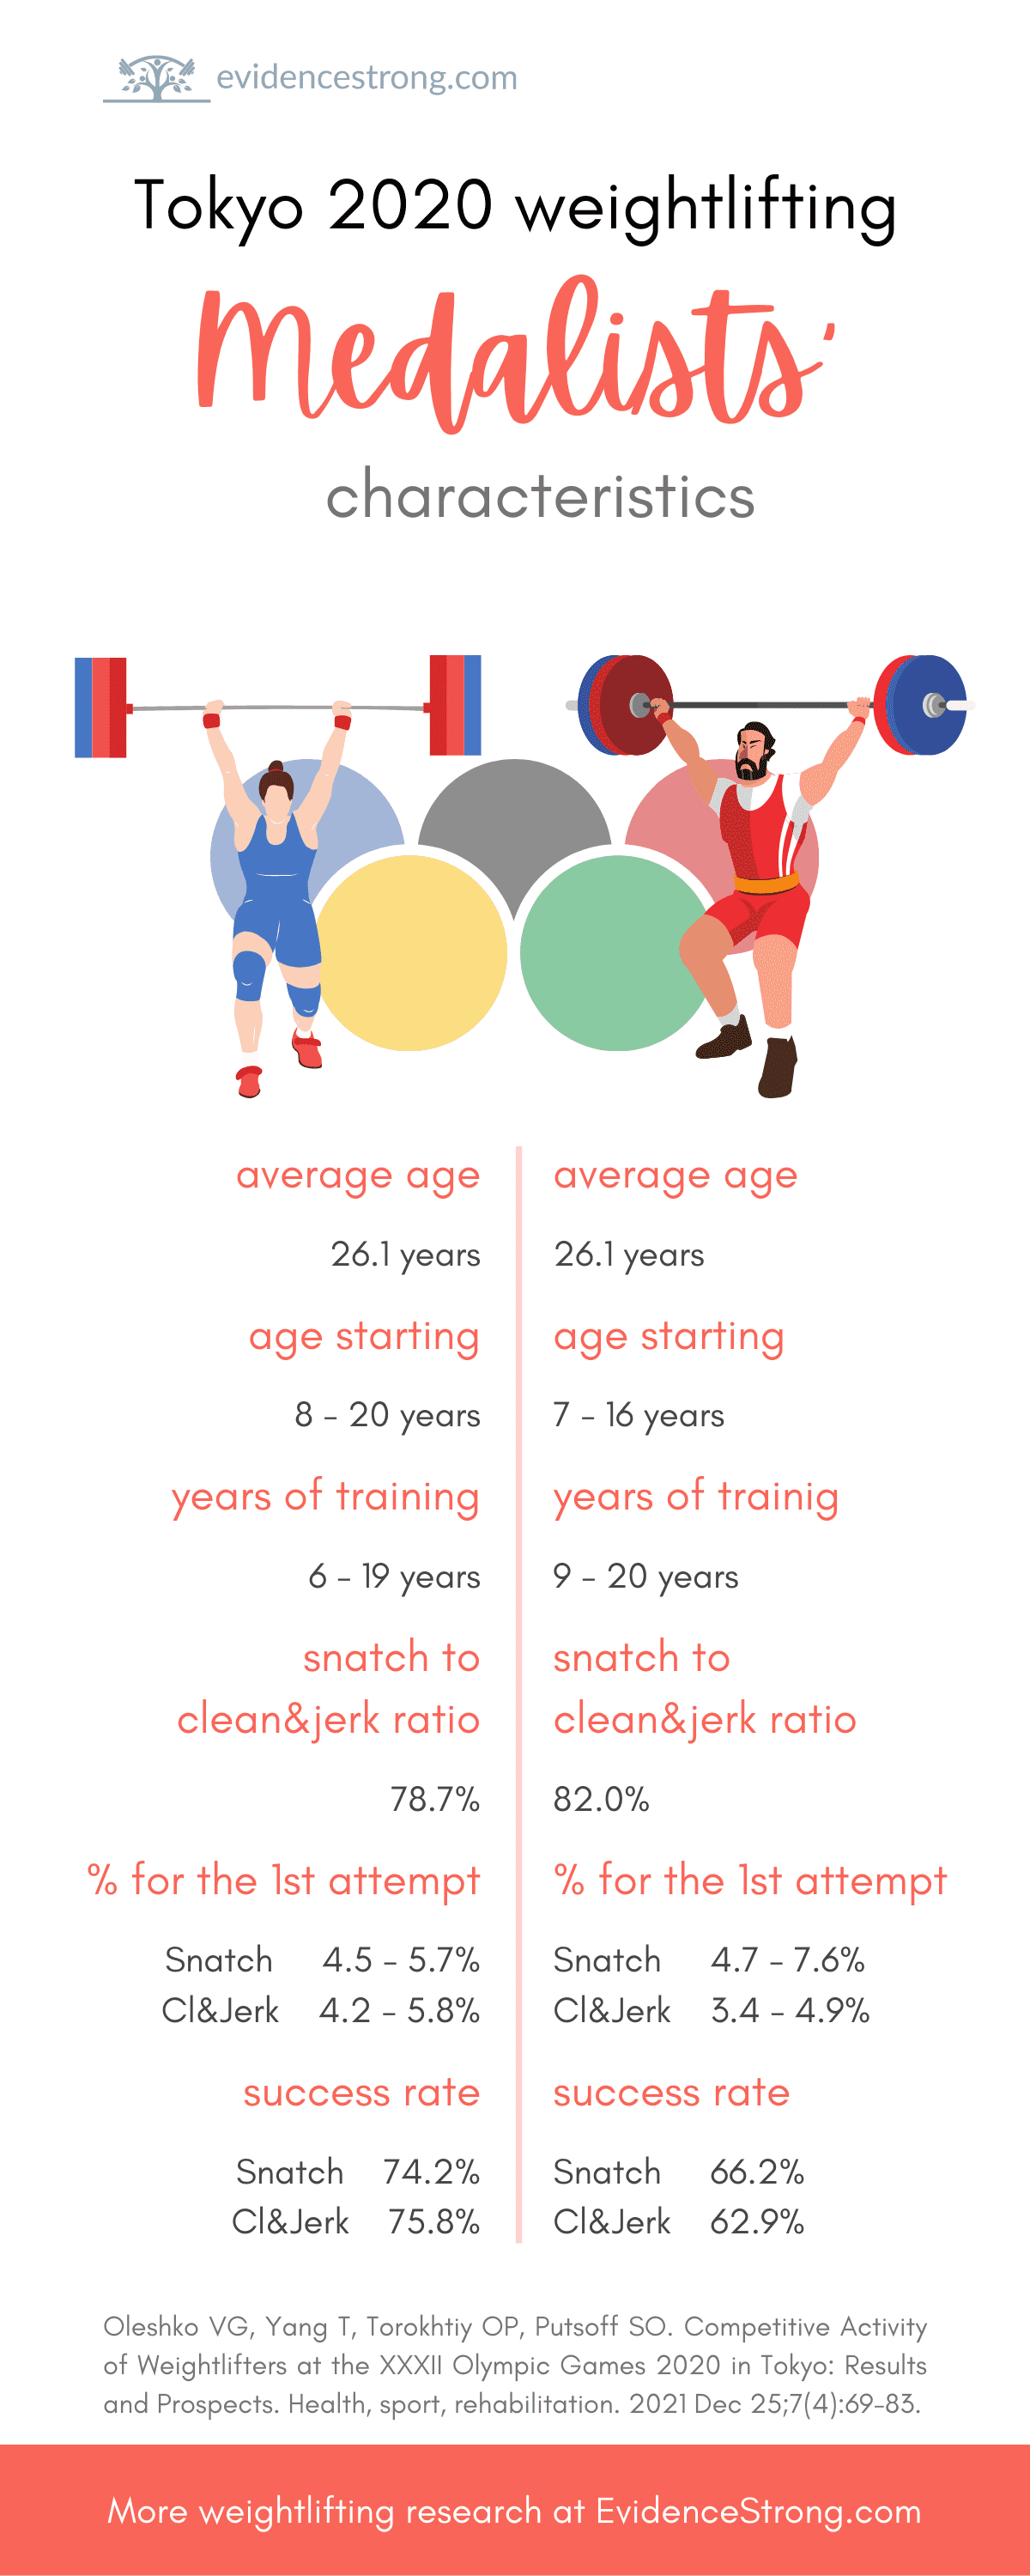 Tokyo 2020 weightlifting medalists' characteristics - Infographic